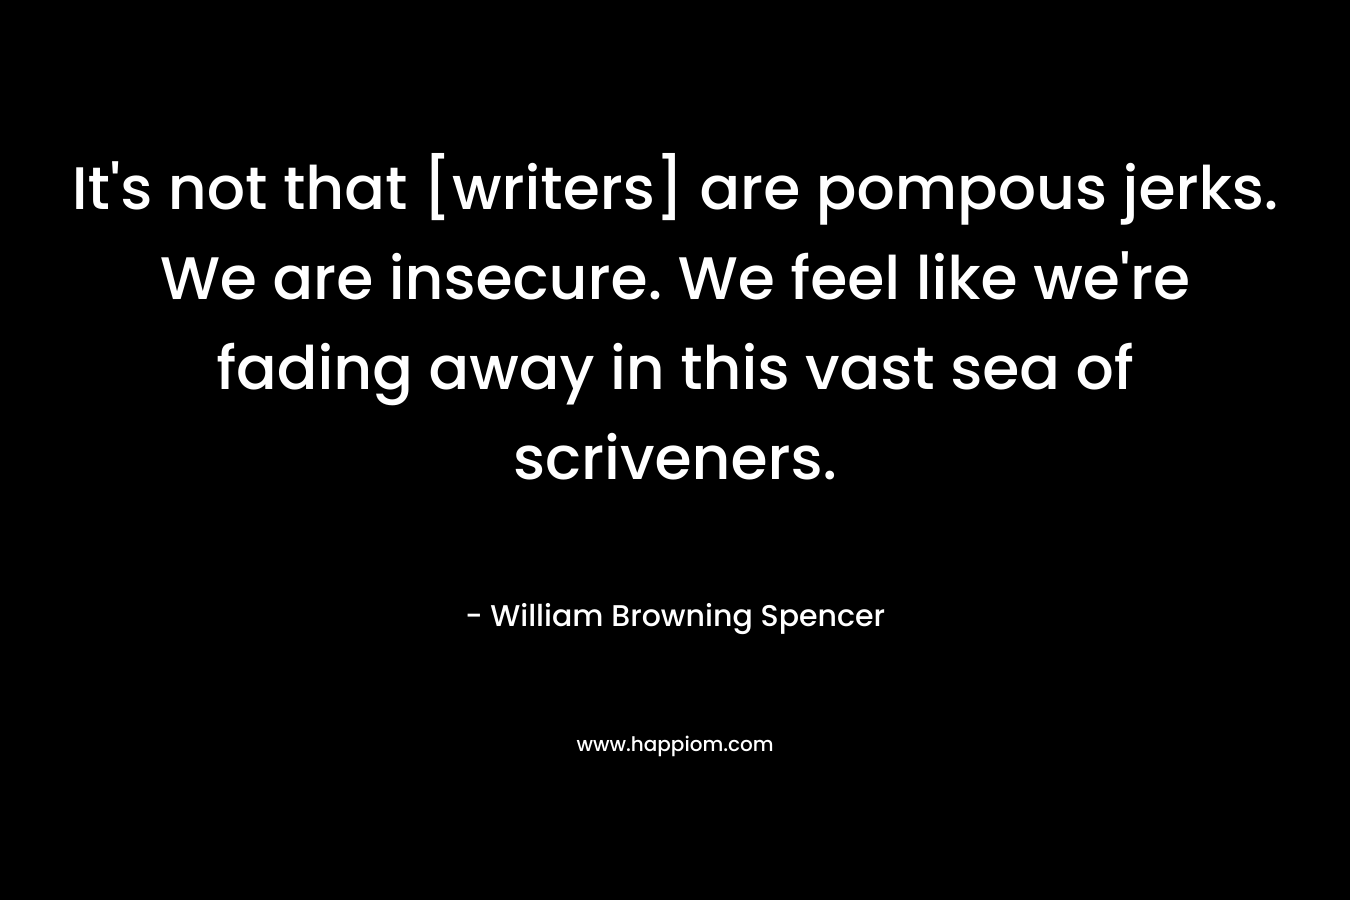 It's not that [writers] are pompous jerks. We are insecure. We feel like we're fading away in this vast sea of scriveners.